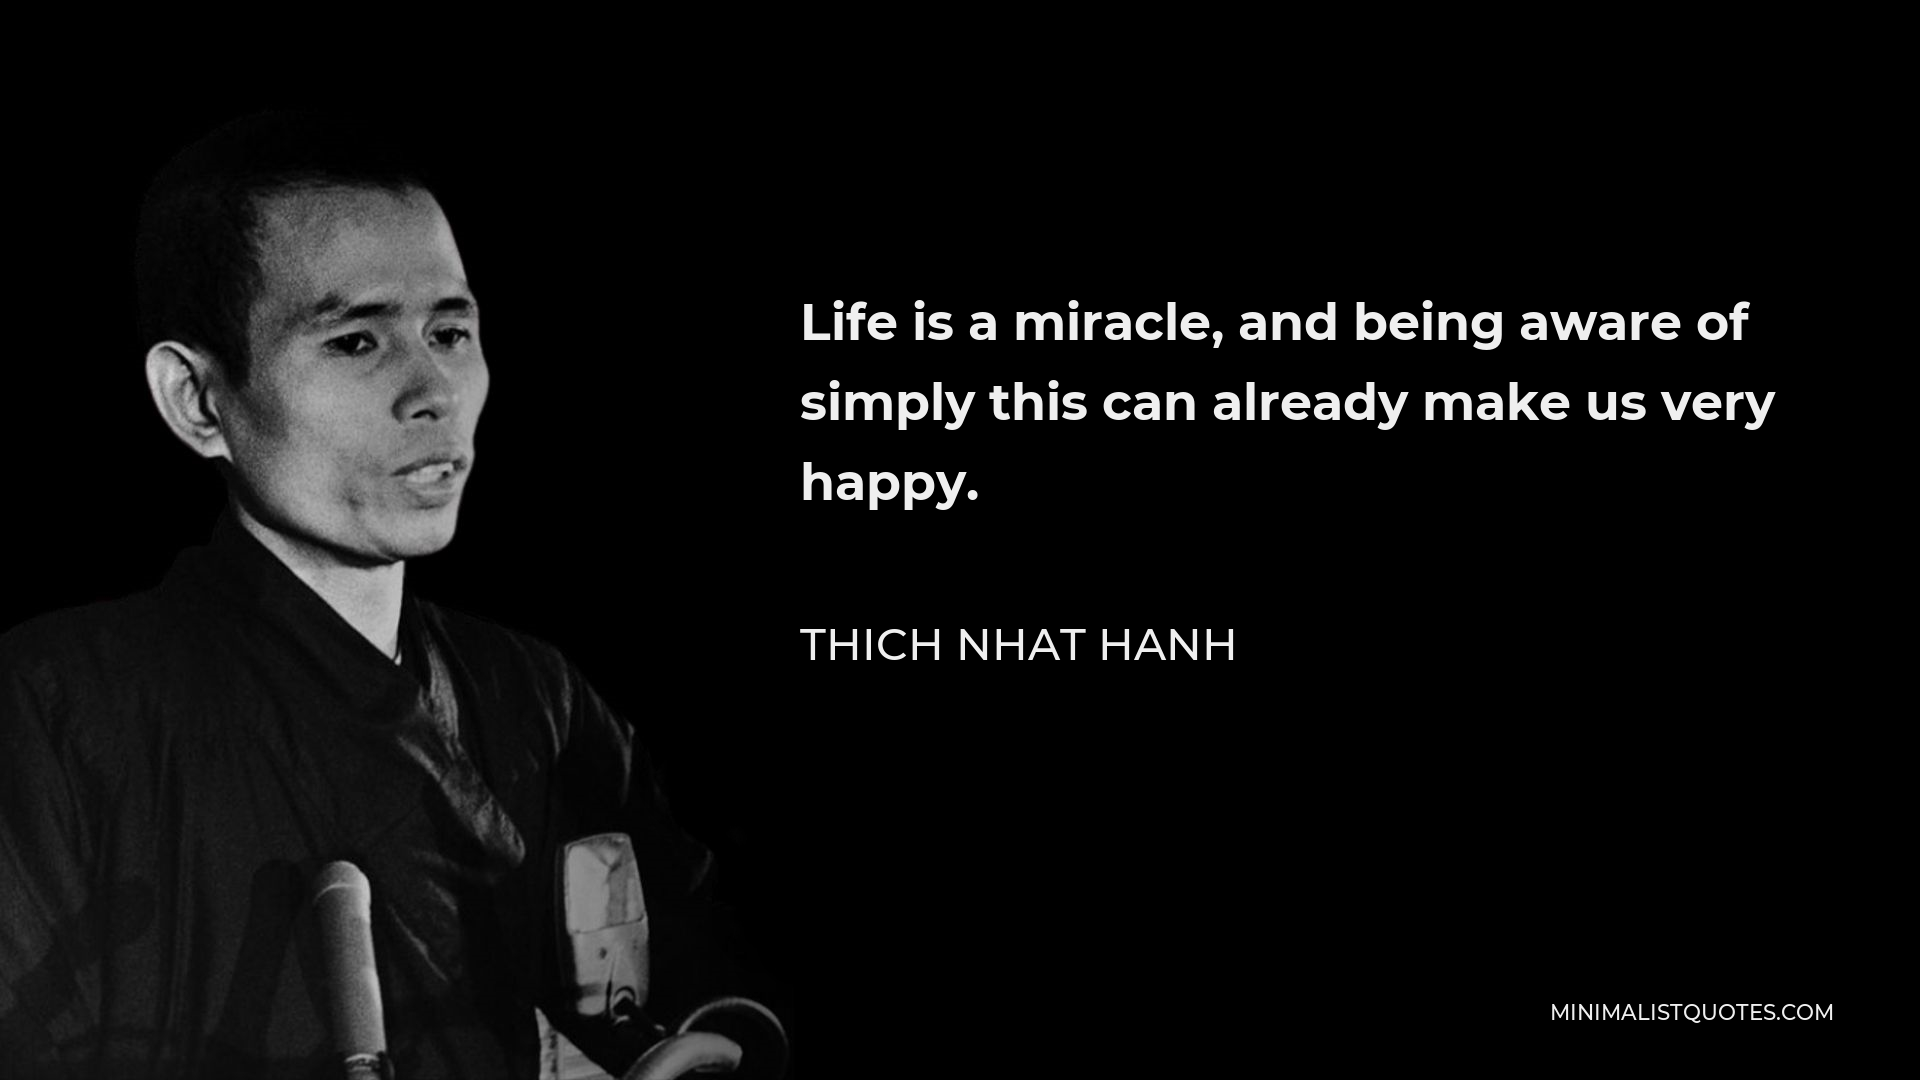 Thich Nhat Hanh Quote - Life is a miracle, and being aware of simply this can already make us very happy.